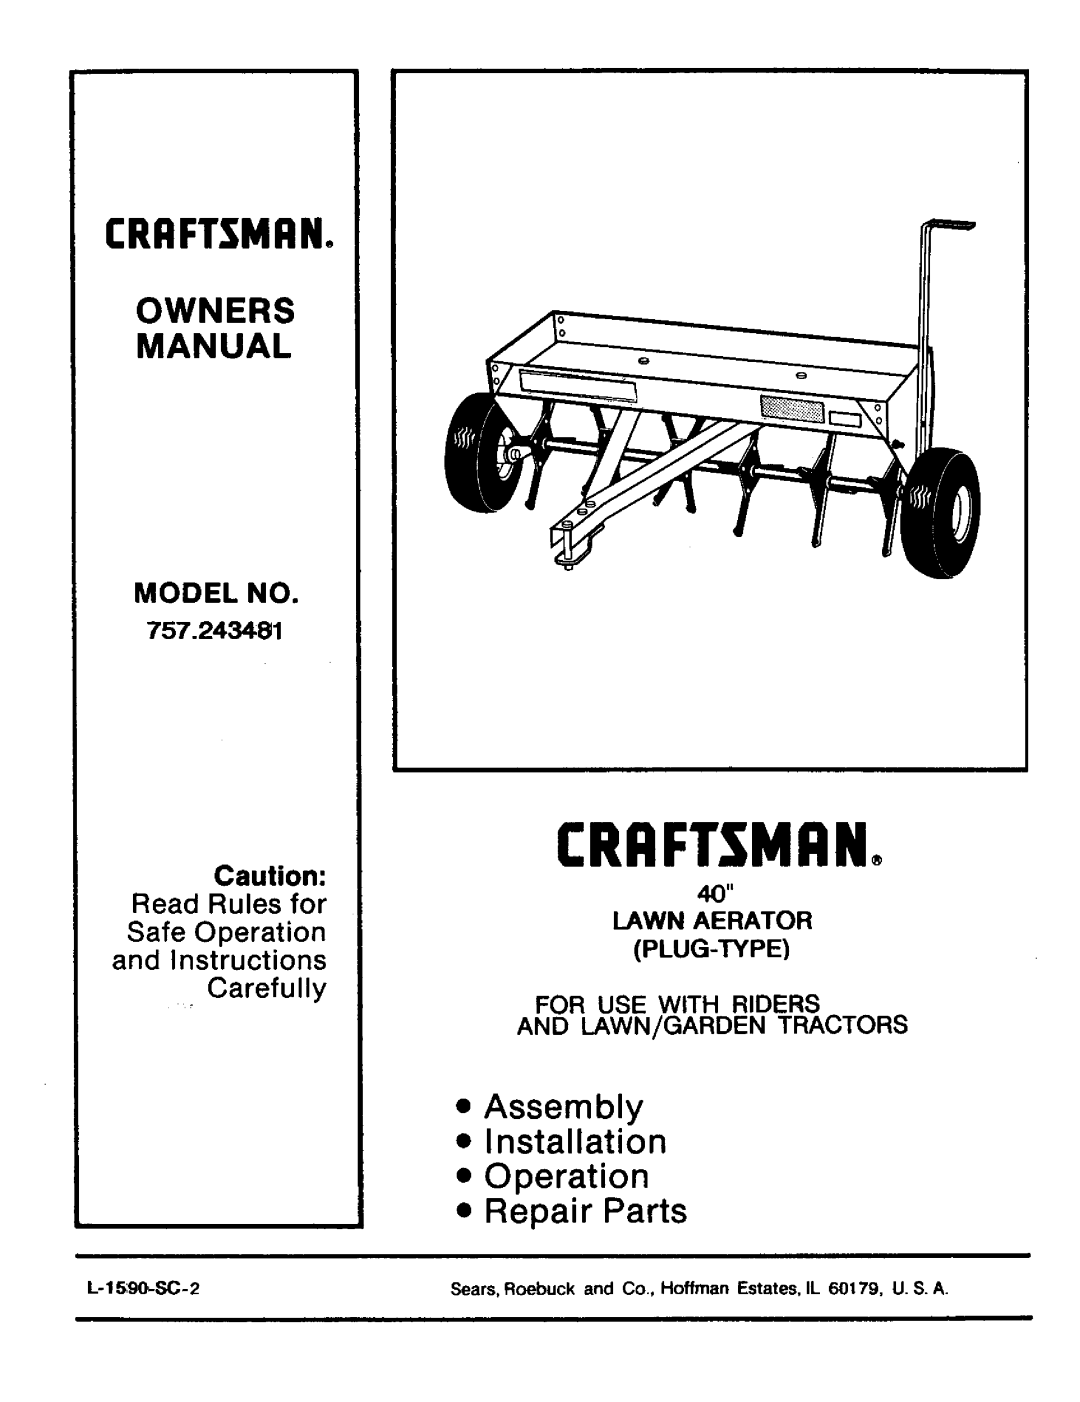 Craftsman 757.243481 owner manual Lawn Aerator Plug-Type, For Use With Riders And Lawn/Garden Tractors, CRRFTSMRNo 